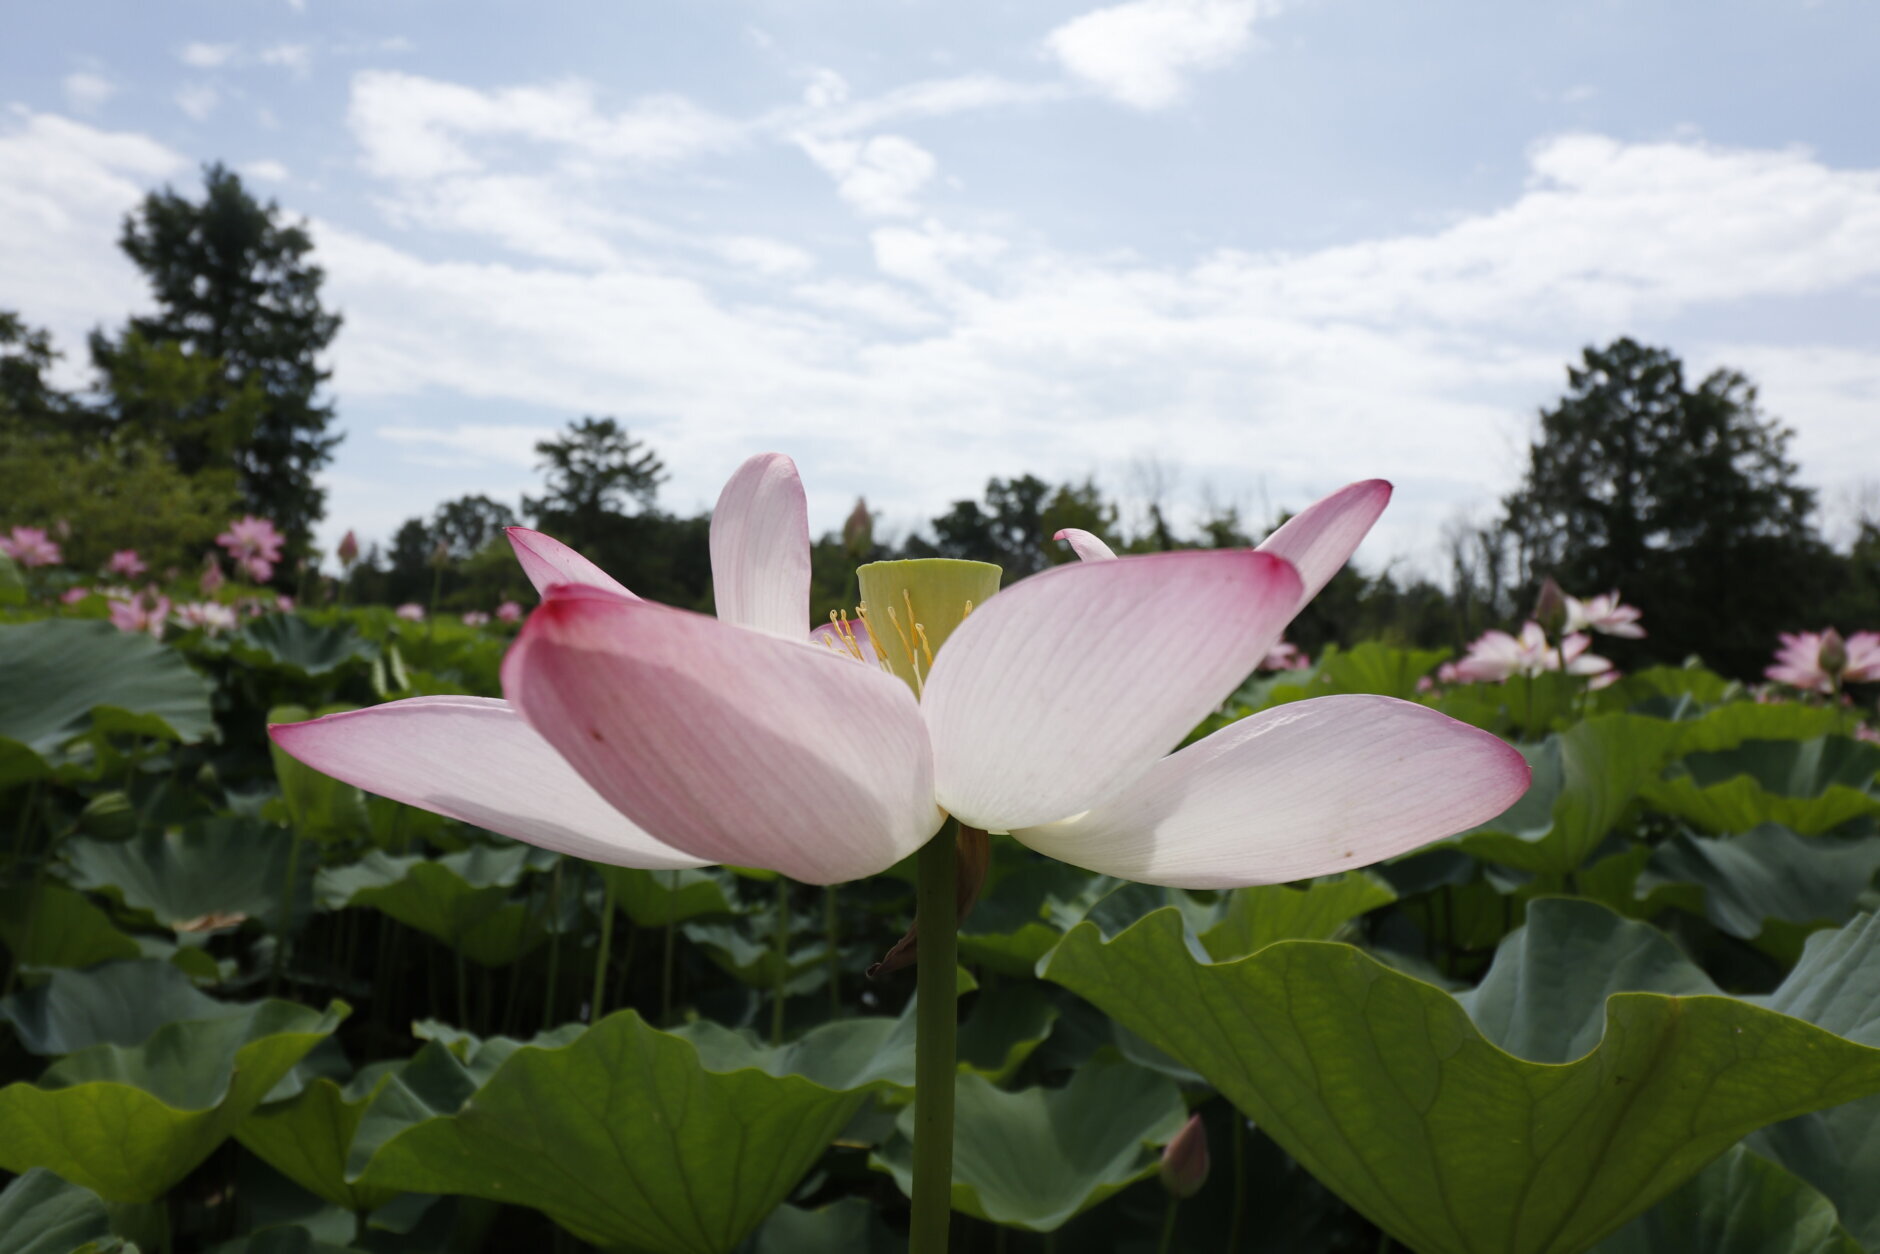 See DC's other famous blossoms at the Kenilworth Aquatic Gardens